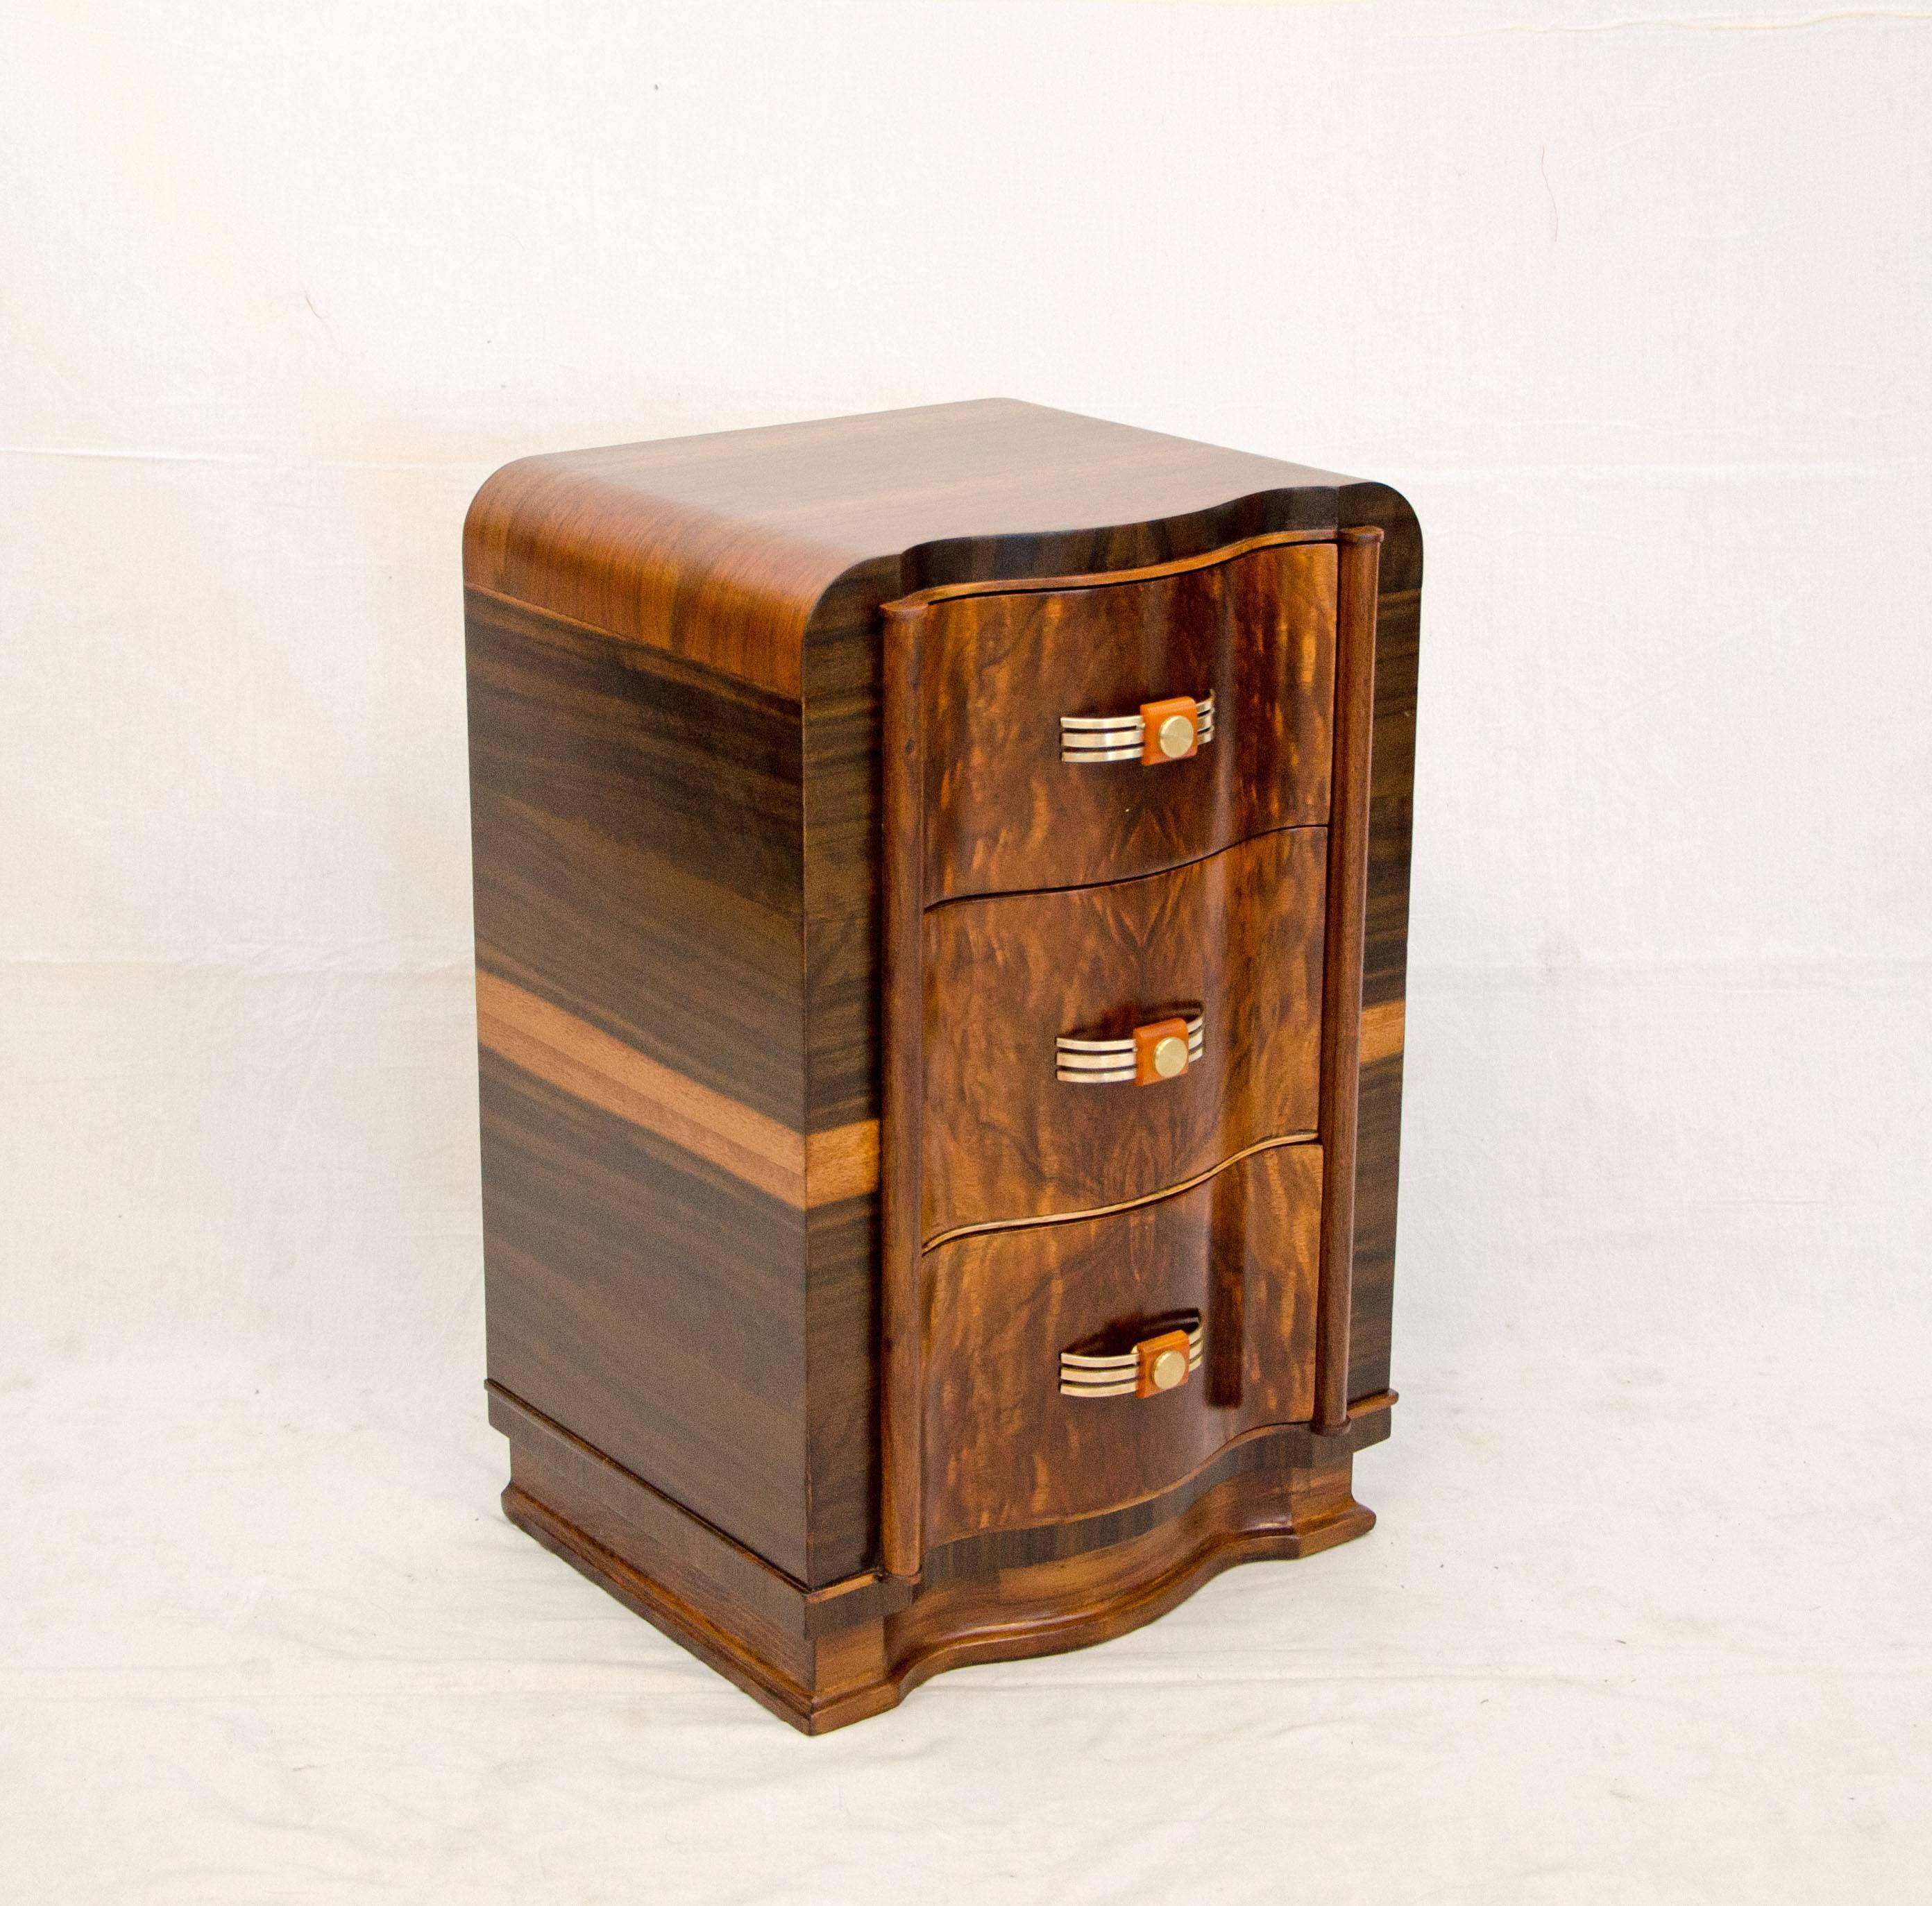 Curvaceous walnut Art Deco nightstand with serpentine drawer fronts and book-matched burl walnut grain patterns, also displays matched grain on the sides. Original brass and Bakelite pulls on all three drawers.

Matching dresser and vanity in